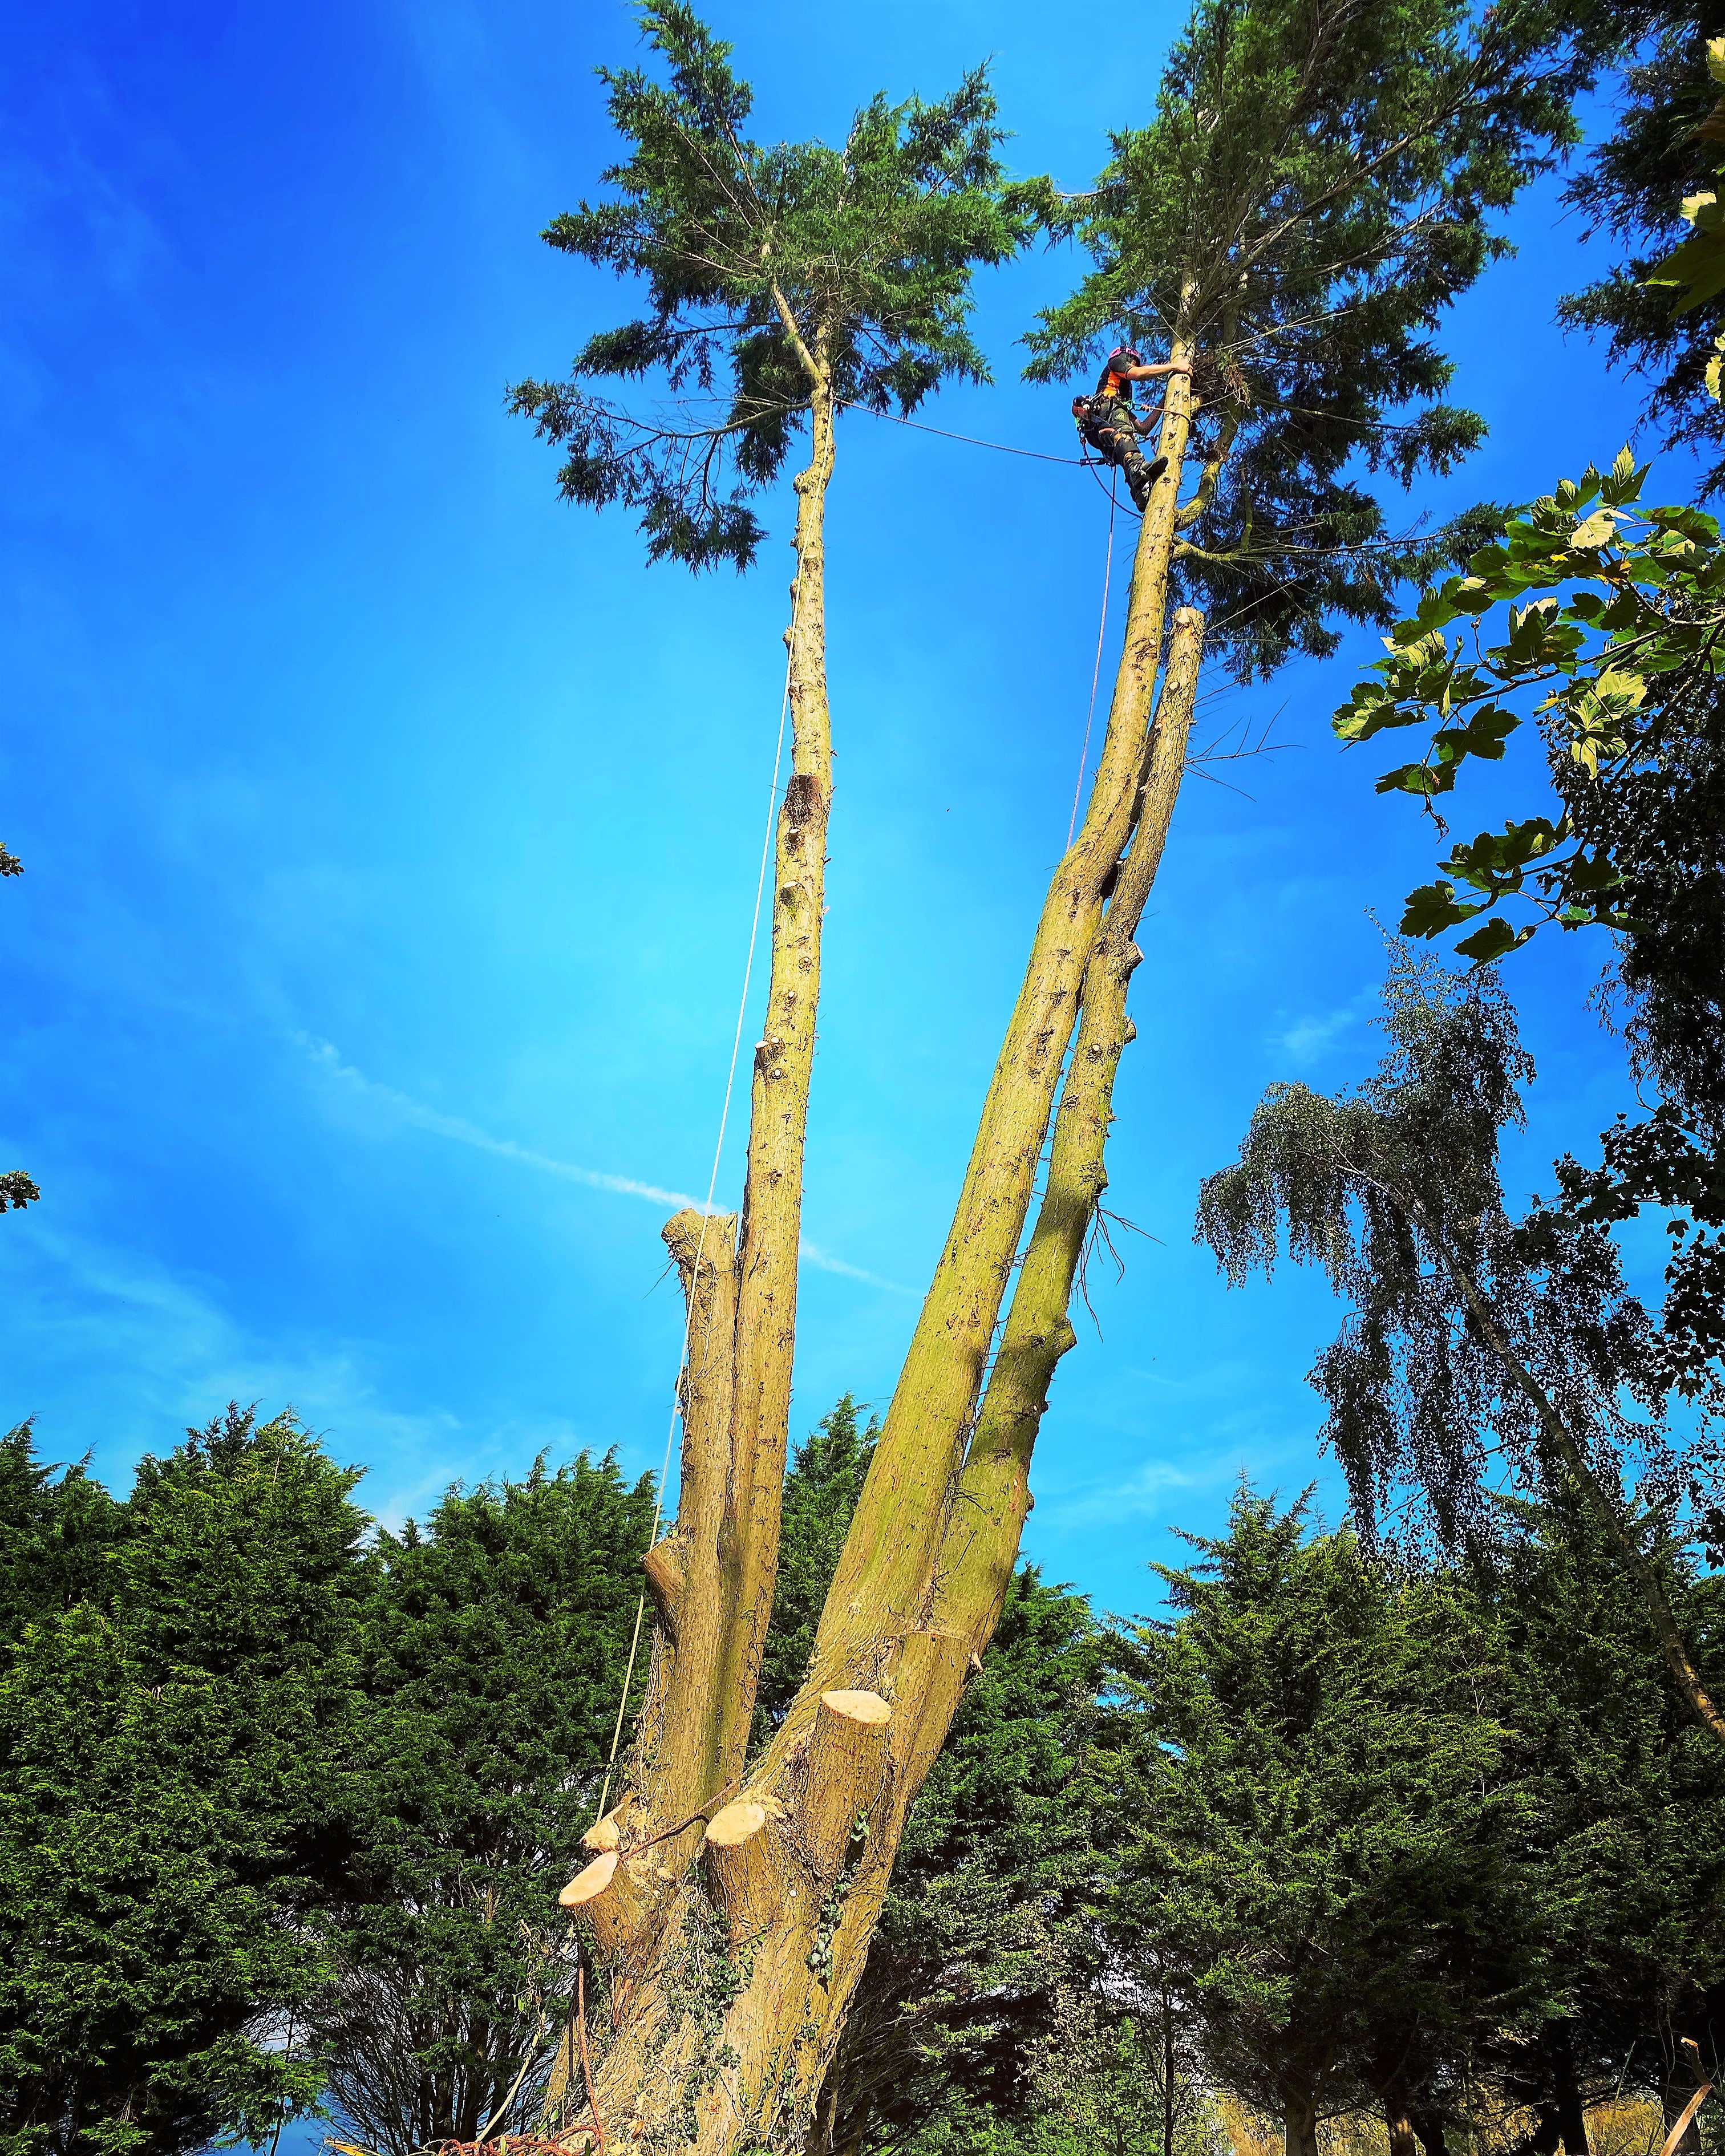 Tree surgery in Weymouth, Dorset. Commercial Tree removal/felling in Weymouth, Portland, Dorchester.